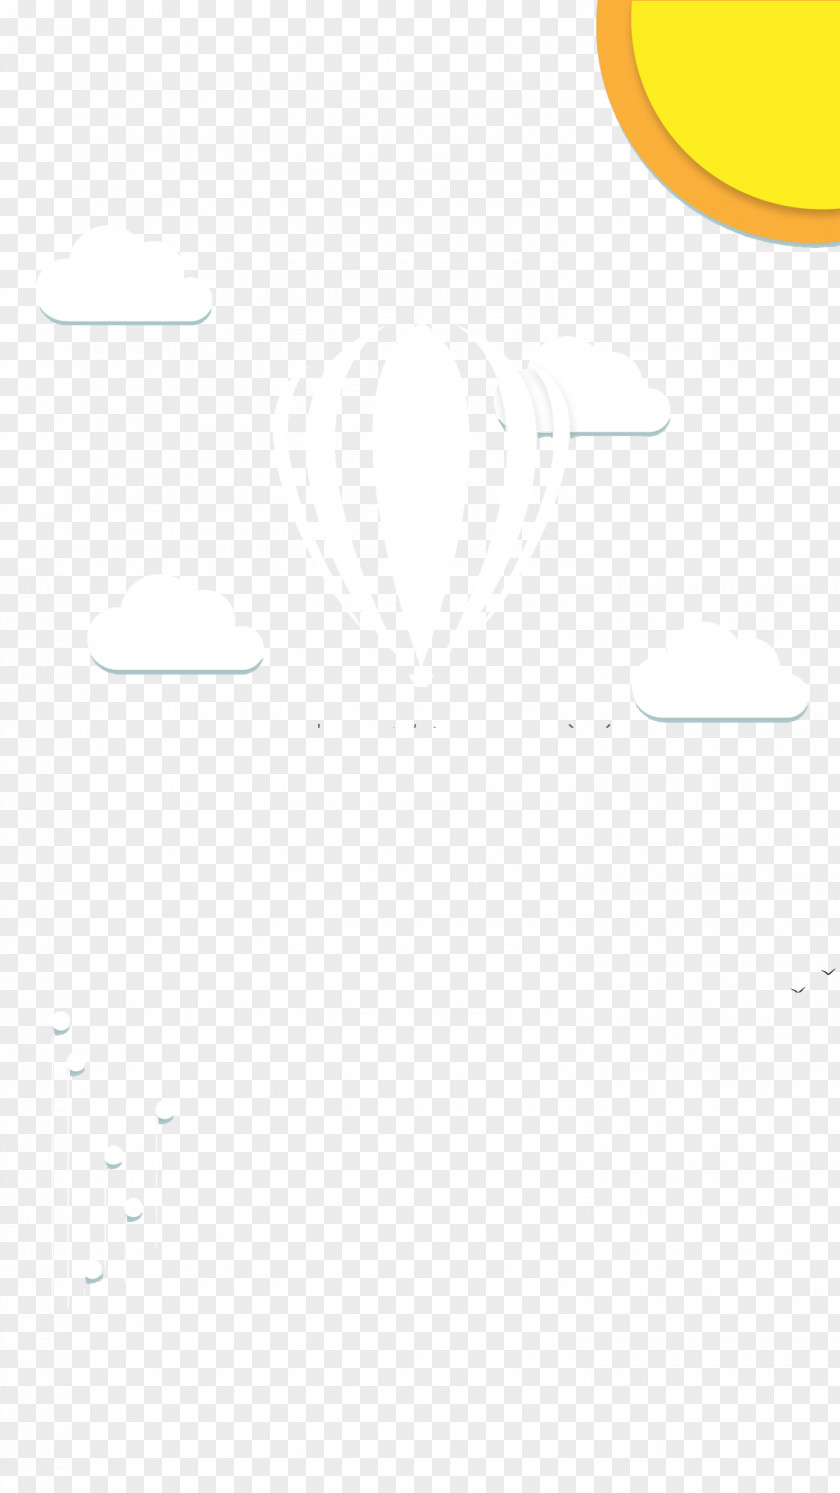 Hot Air Balloon White Material Pattern PNG